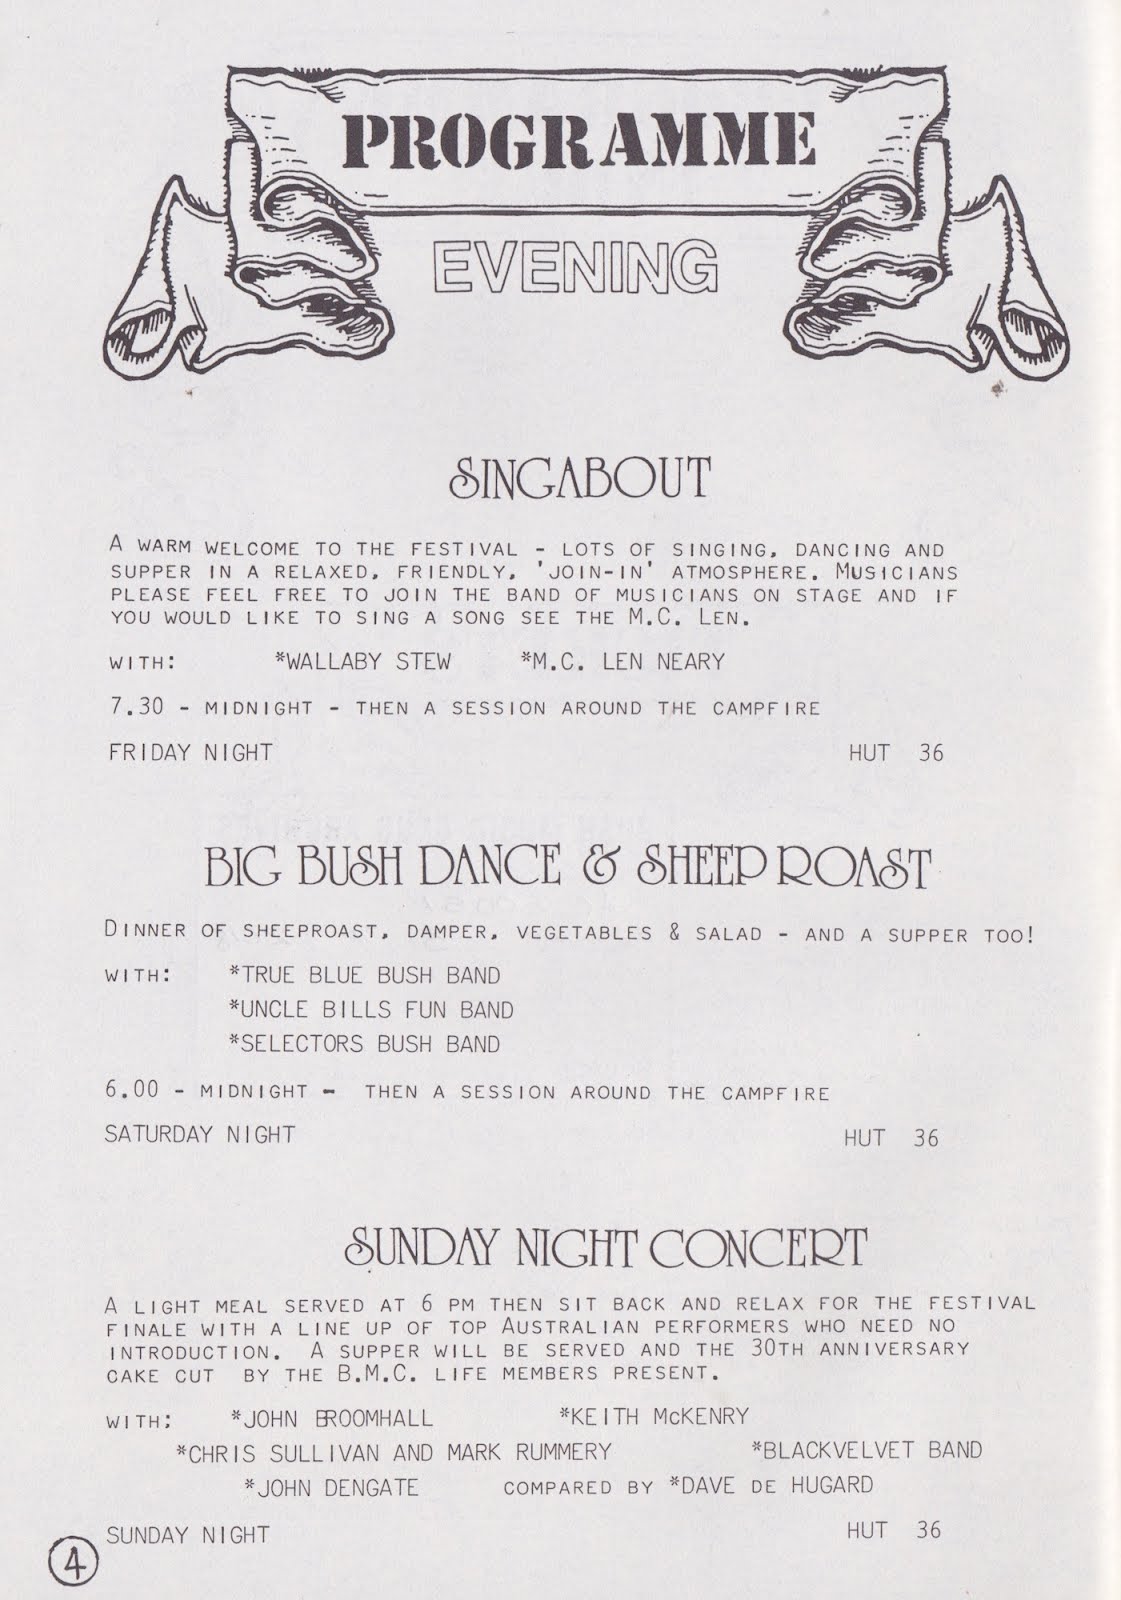 The Bush Music Club: From the 1984 Music Festival program, posters & other ephemera